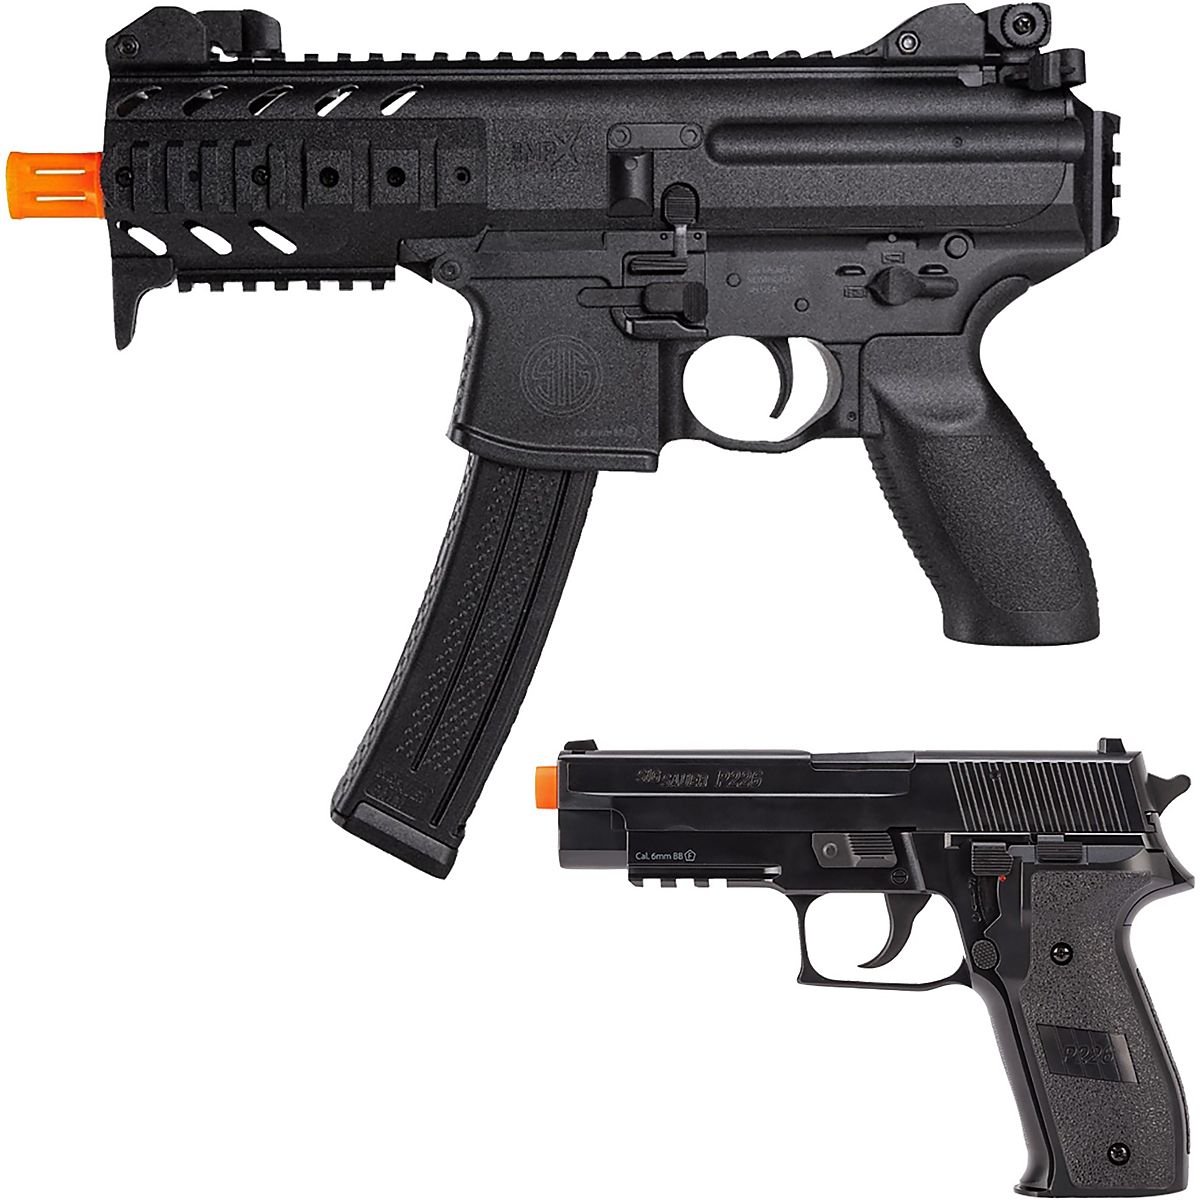 SIG SAUER MPX/P226 6mm Spring Airsoft Kit